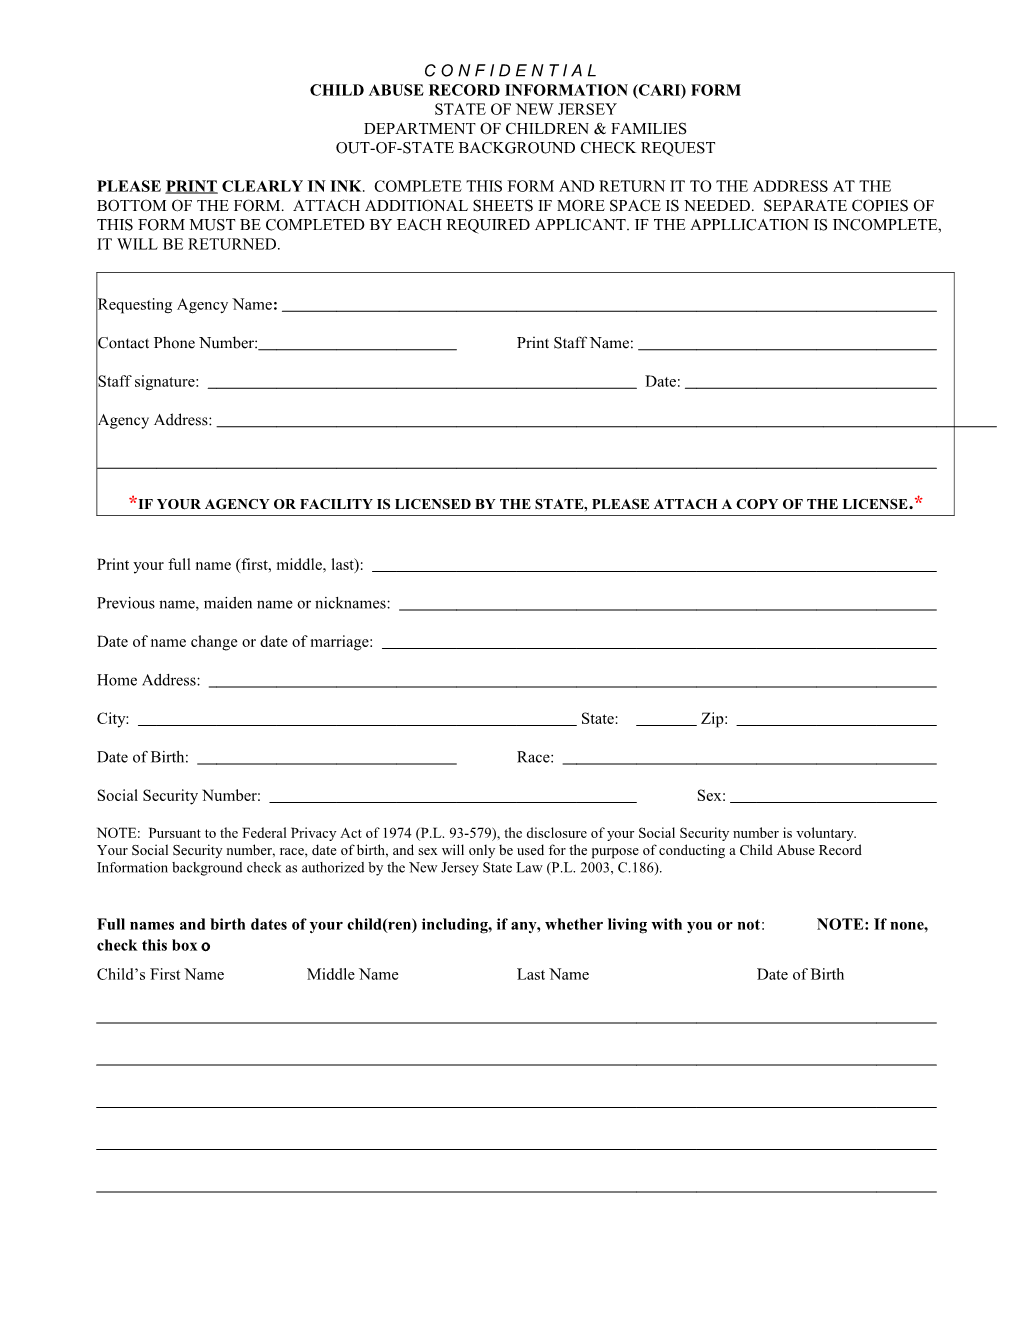 Child Abuse Record Information Form